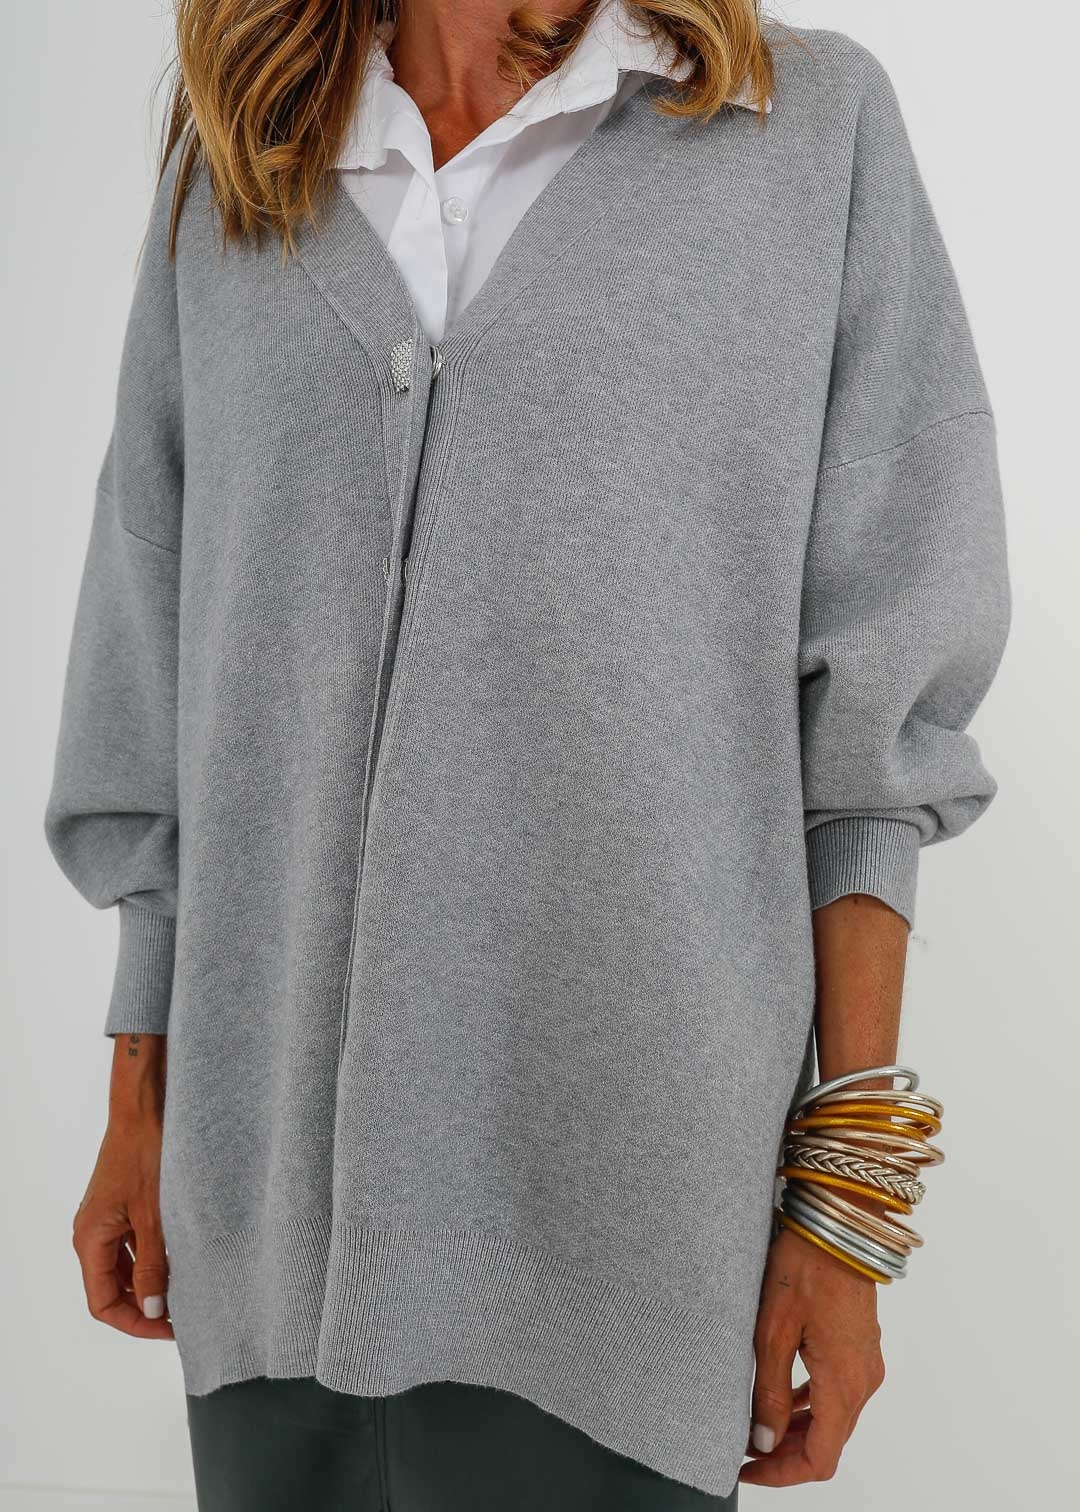 GREY KNITTED CARDIGAN SHINY BUTTONS